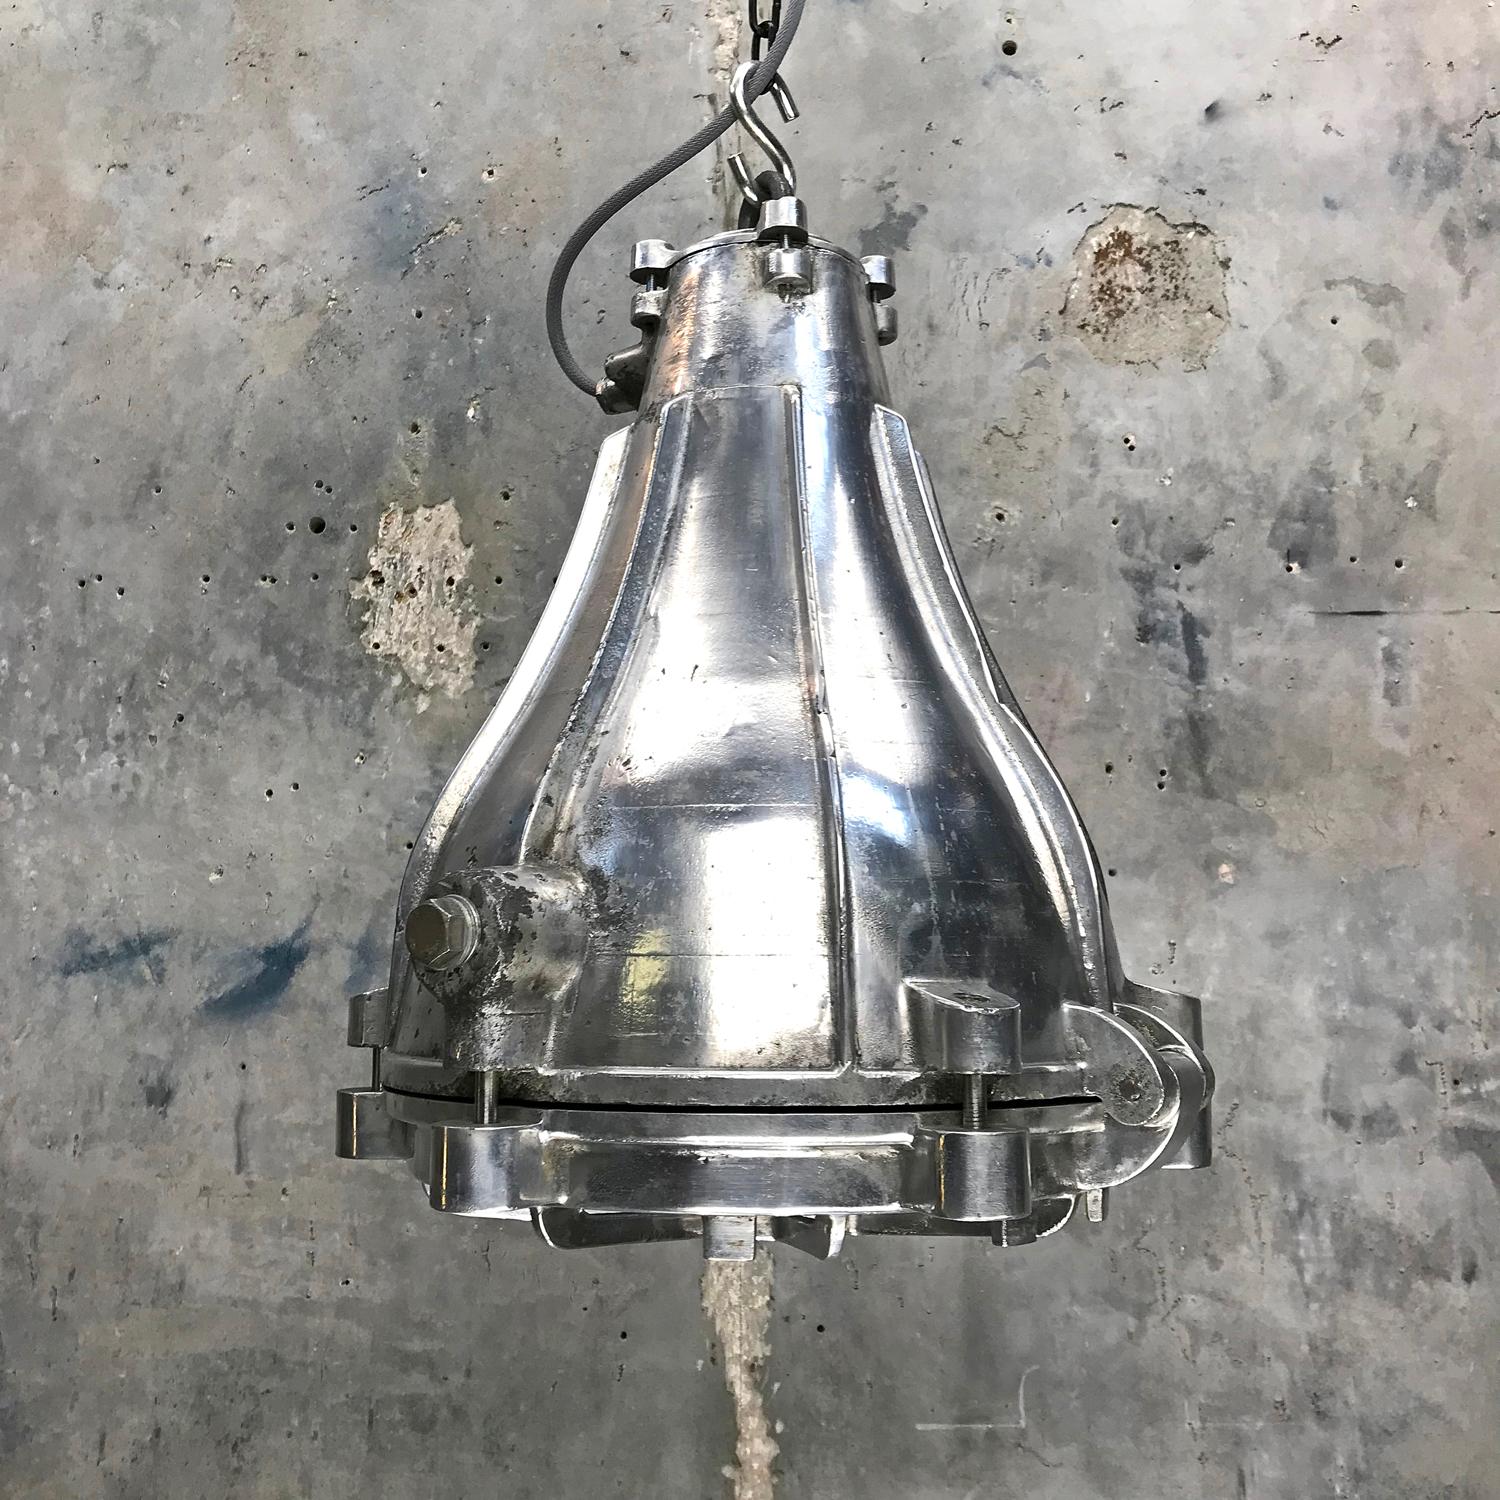 If you are looking for an industrial fitting that is truly unique look no further!

This light has been re-claimed from an ice breaking vessel that would travel through arctic conditions. The 18kg weight prevents it from freezing and fracturing in